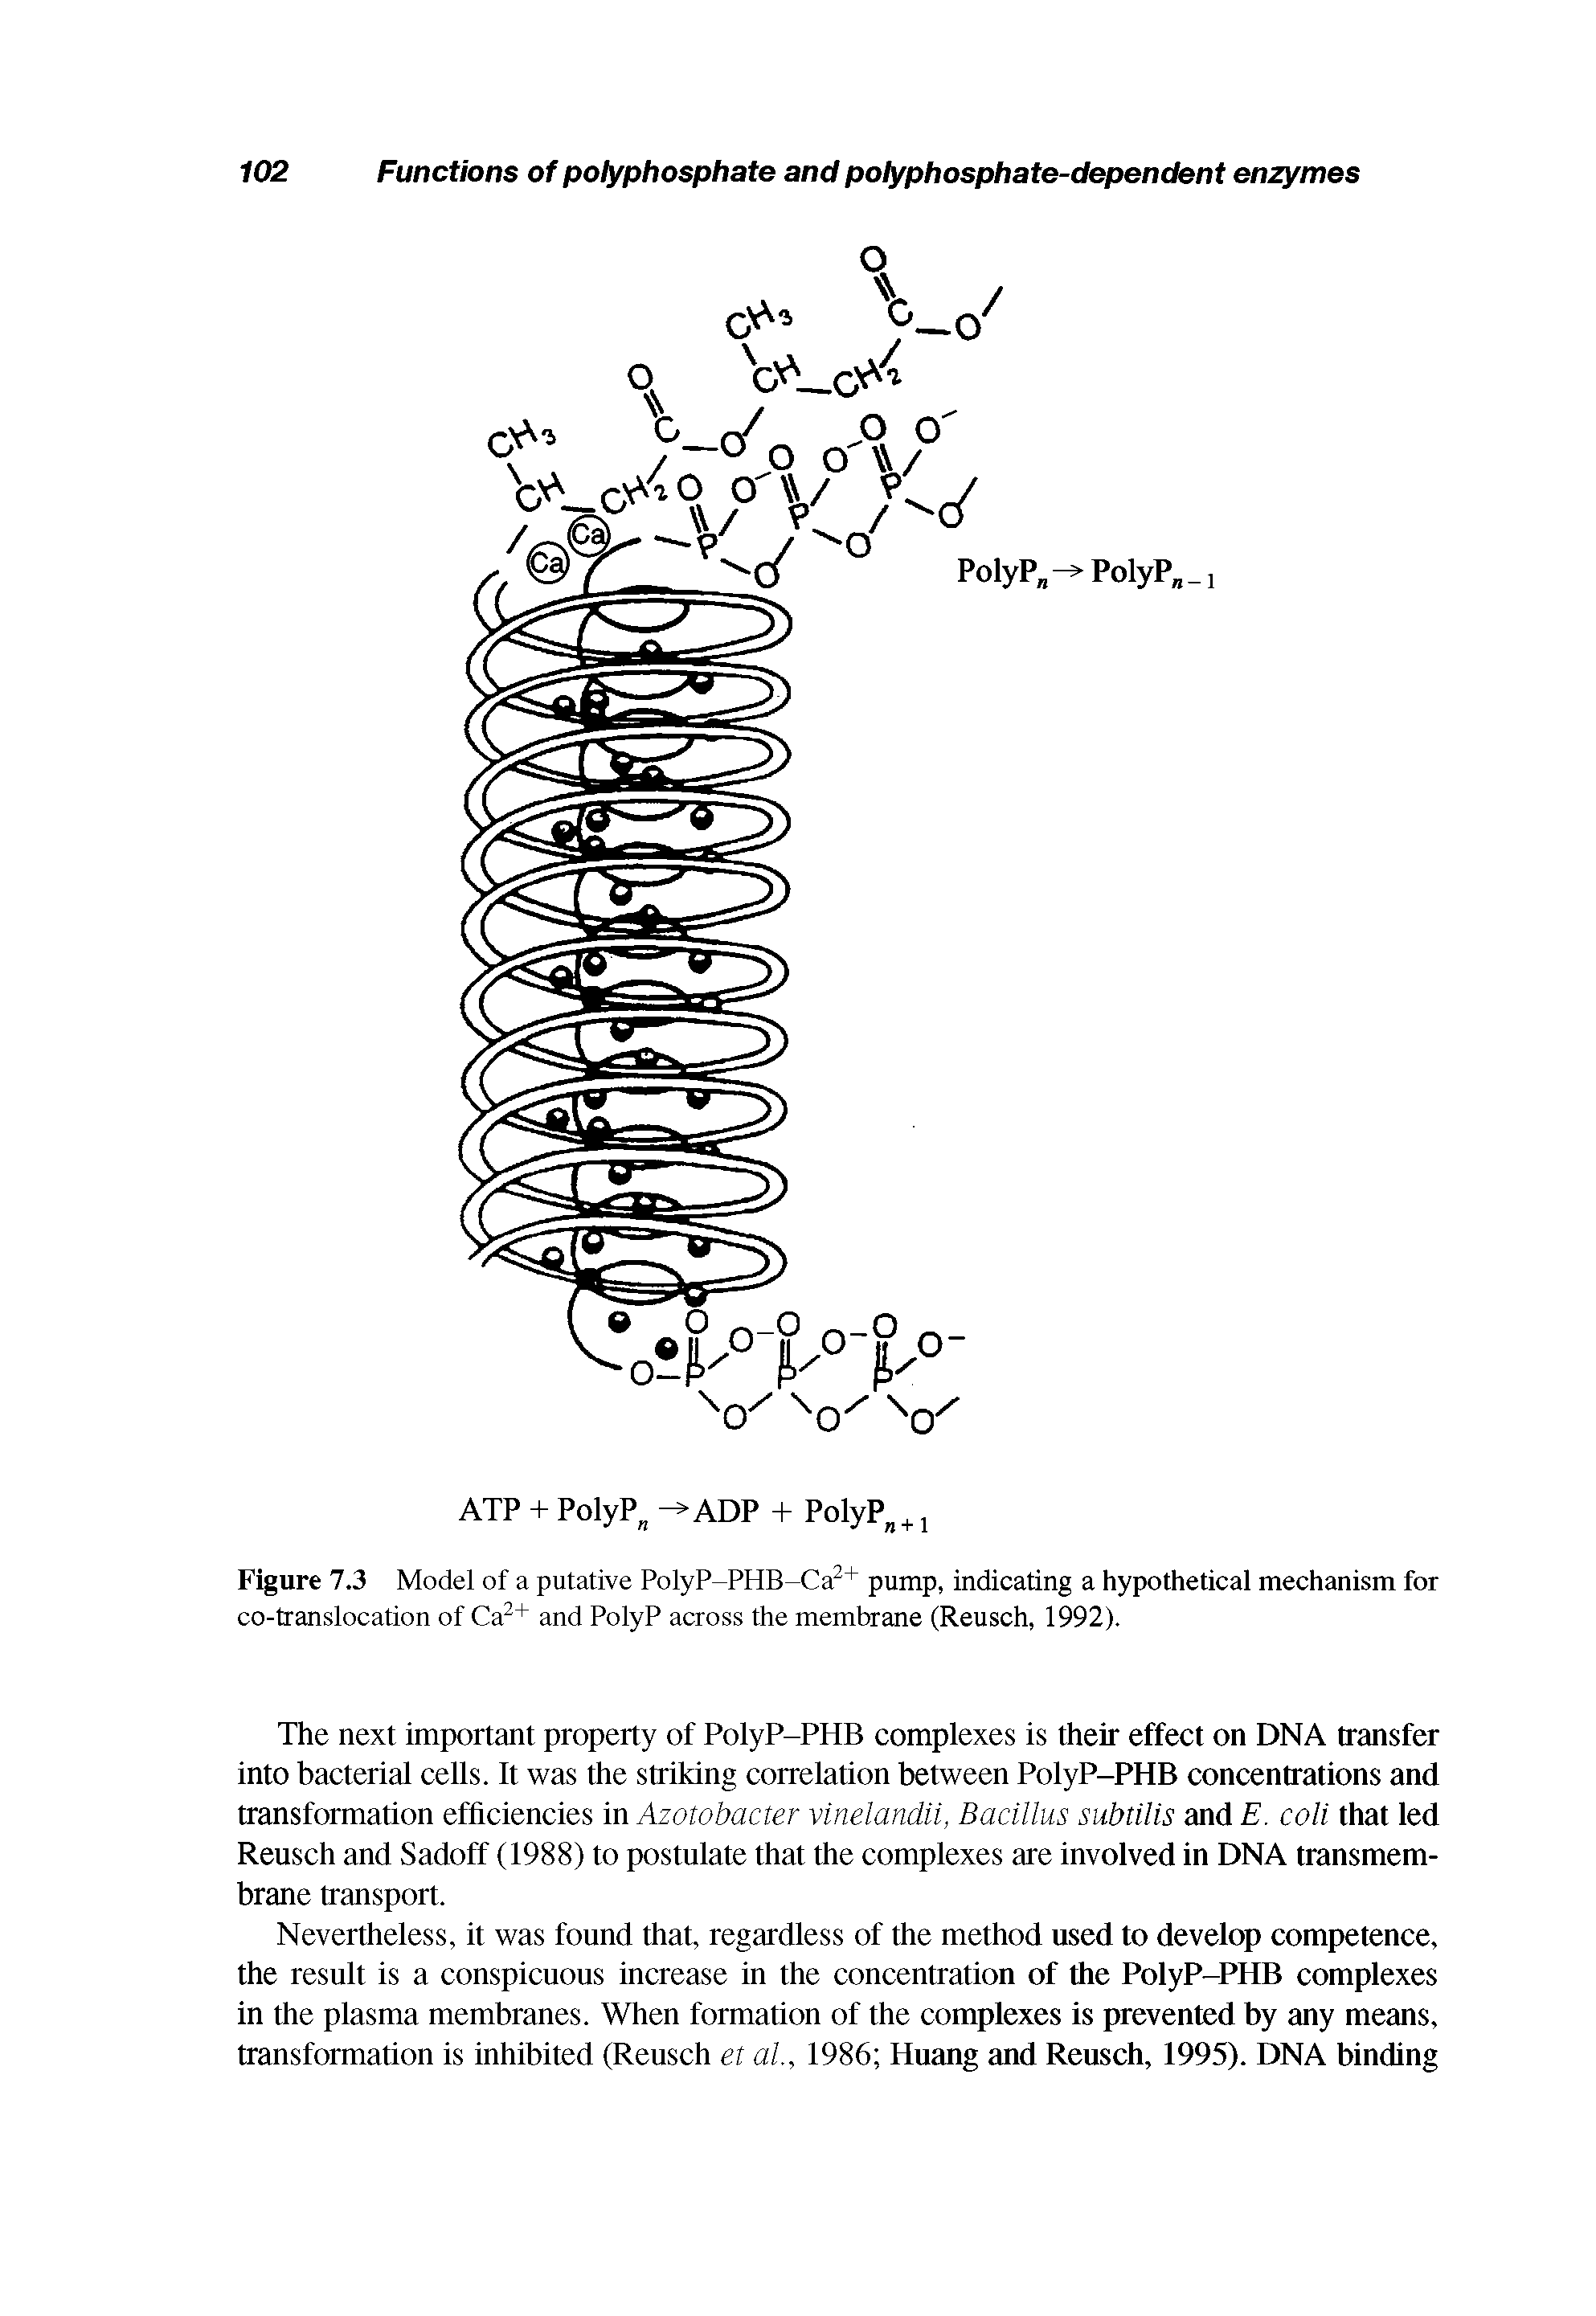 Figure 7.3 Model of a putative PolyP-PHB-Ca2+ pump, indicating a hypothetical mechanism for co-translocation of Ca2+ and PolyP across the membrane (Reusch, 1992).